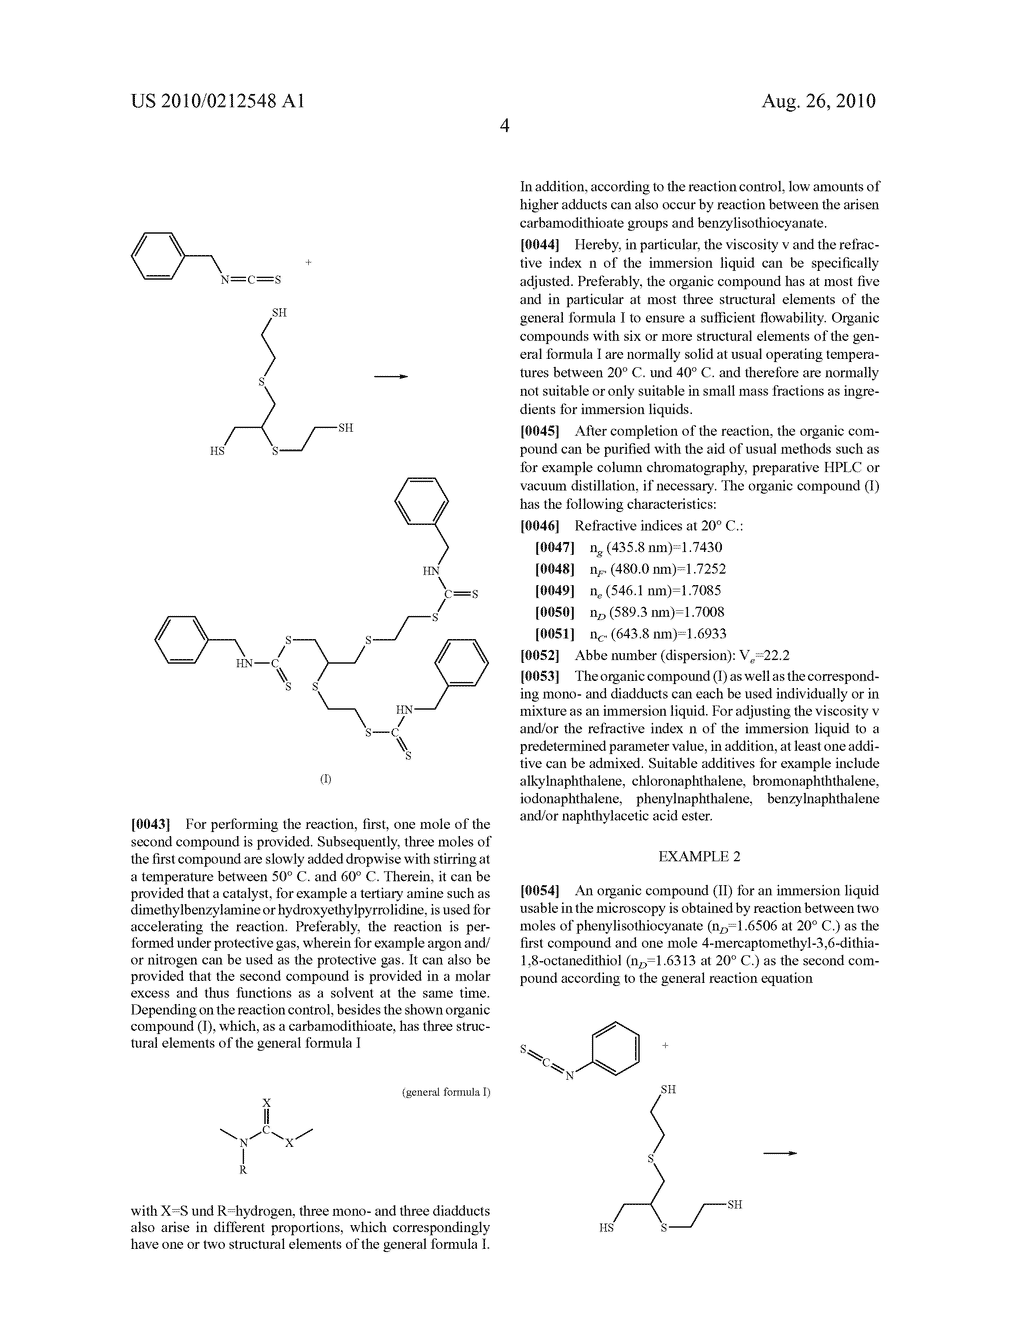 Immersion Liquid And Method For Preparing An Organic Compound For An Immersion Liquid - diagram, schematic, and image 05